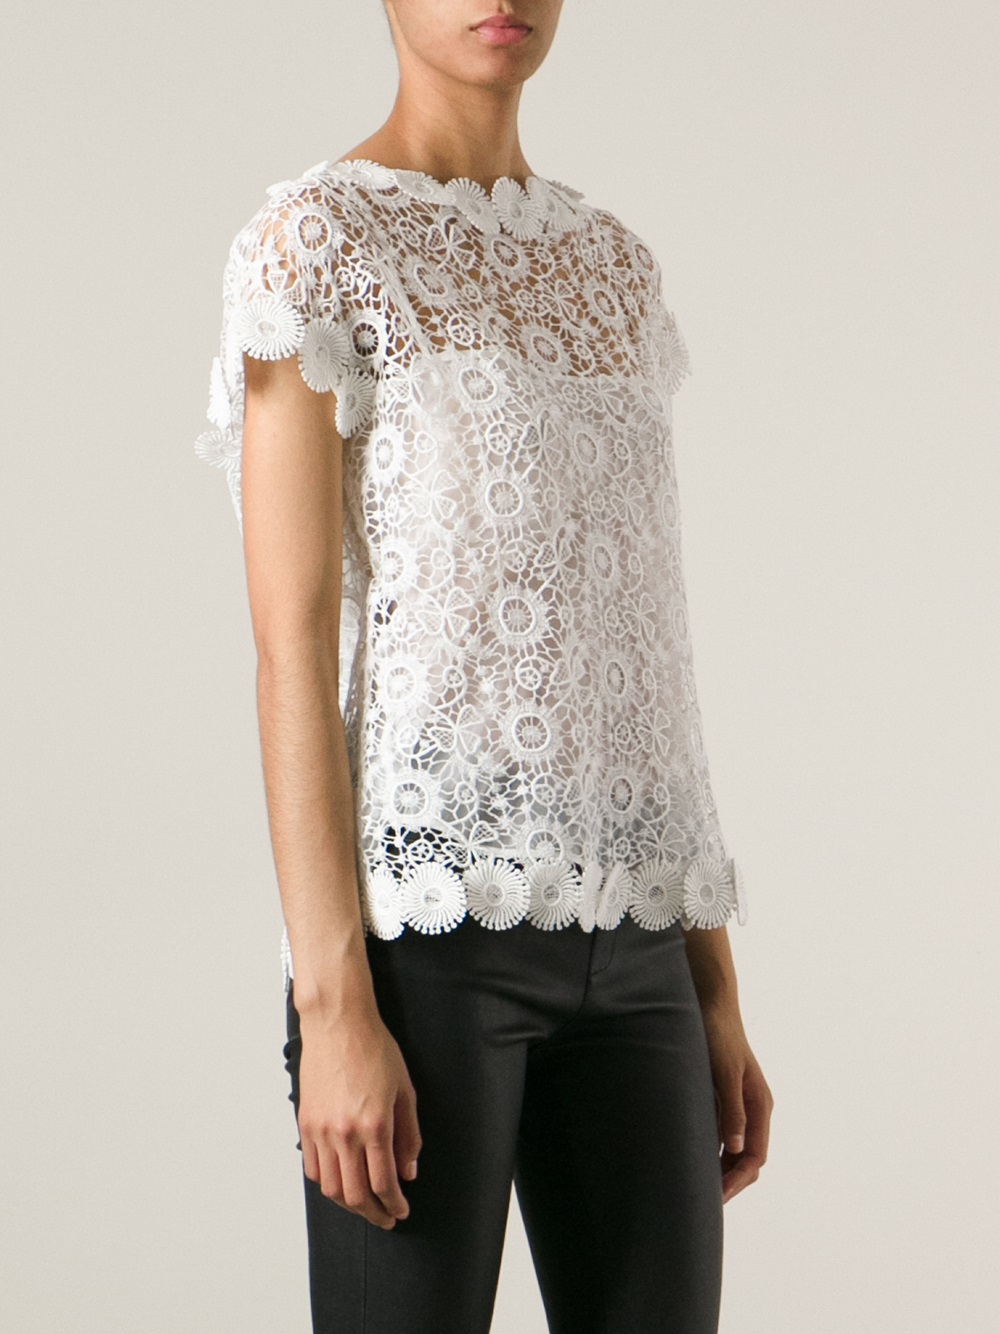 Lyst - Moschino Lace Top in White